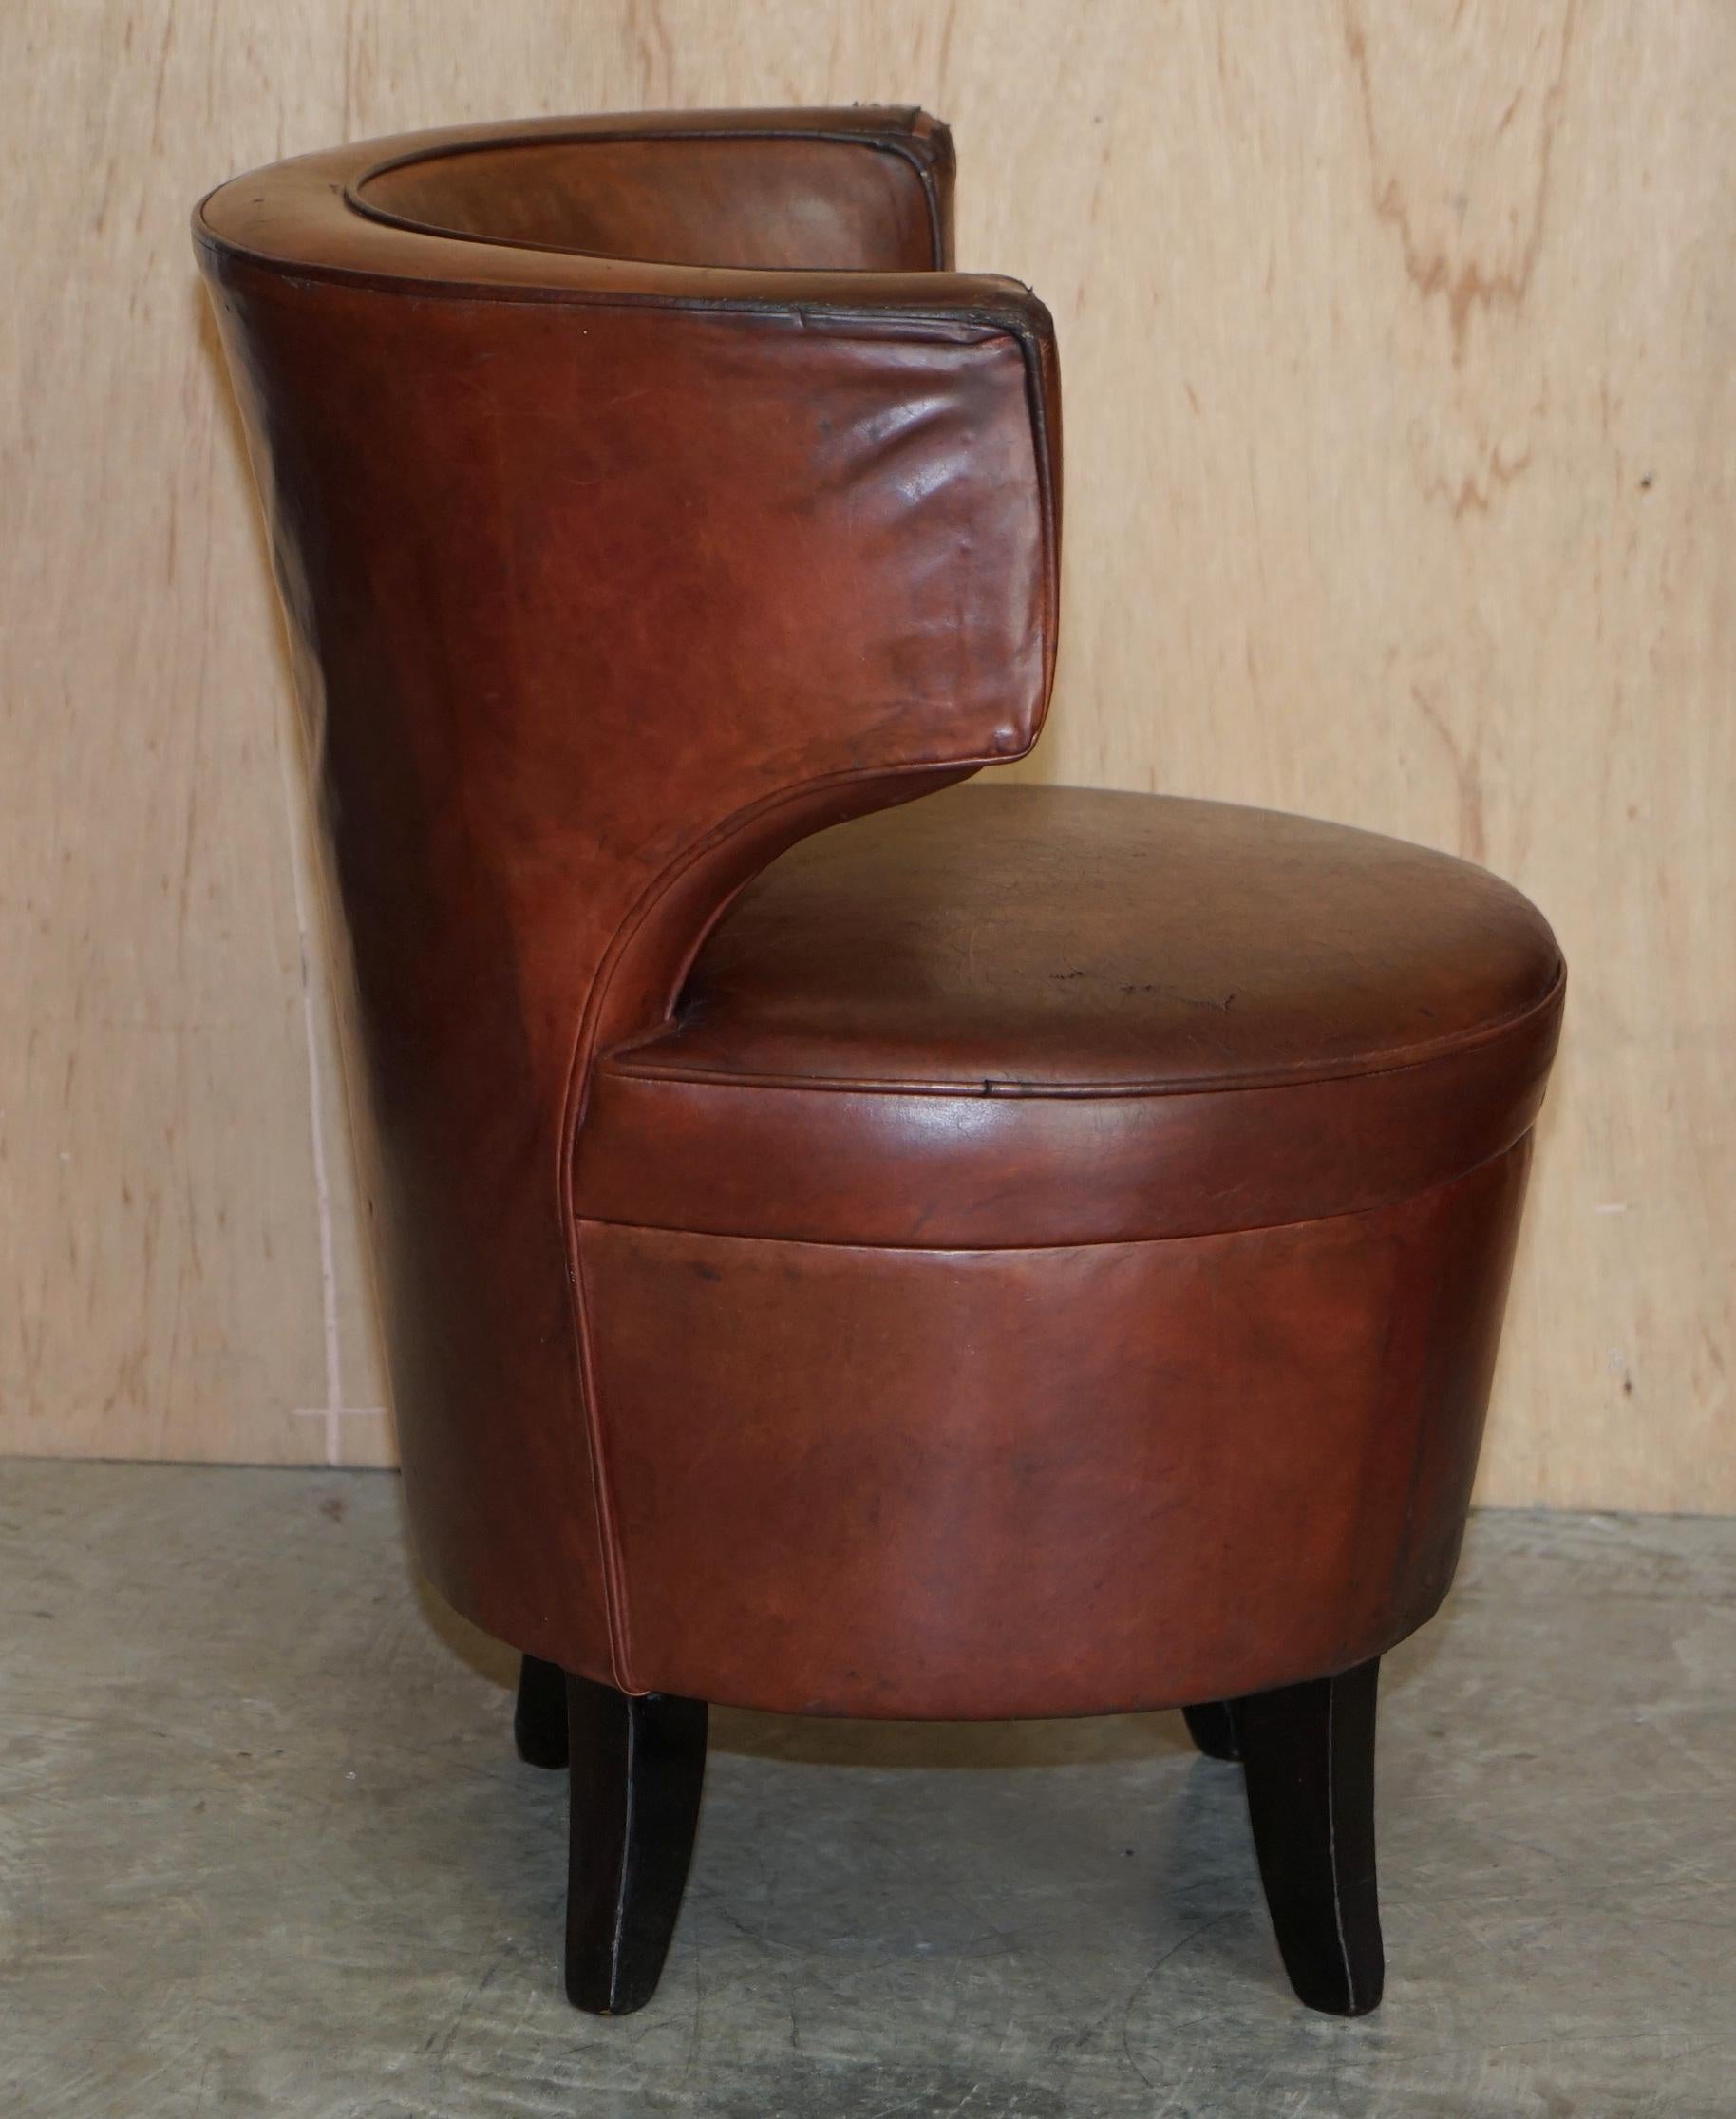 For Restoration Suite of 6 Very Comfortable Aged Brown Leather Tub Armchairs 2